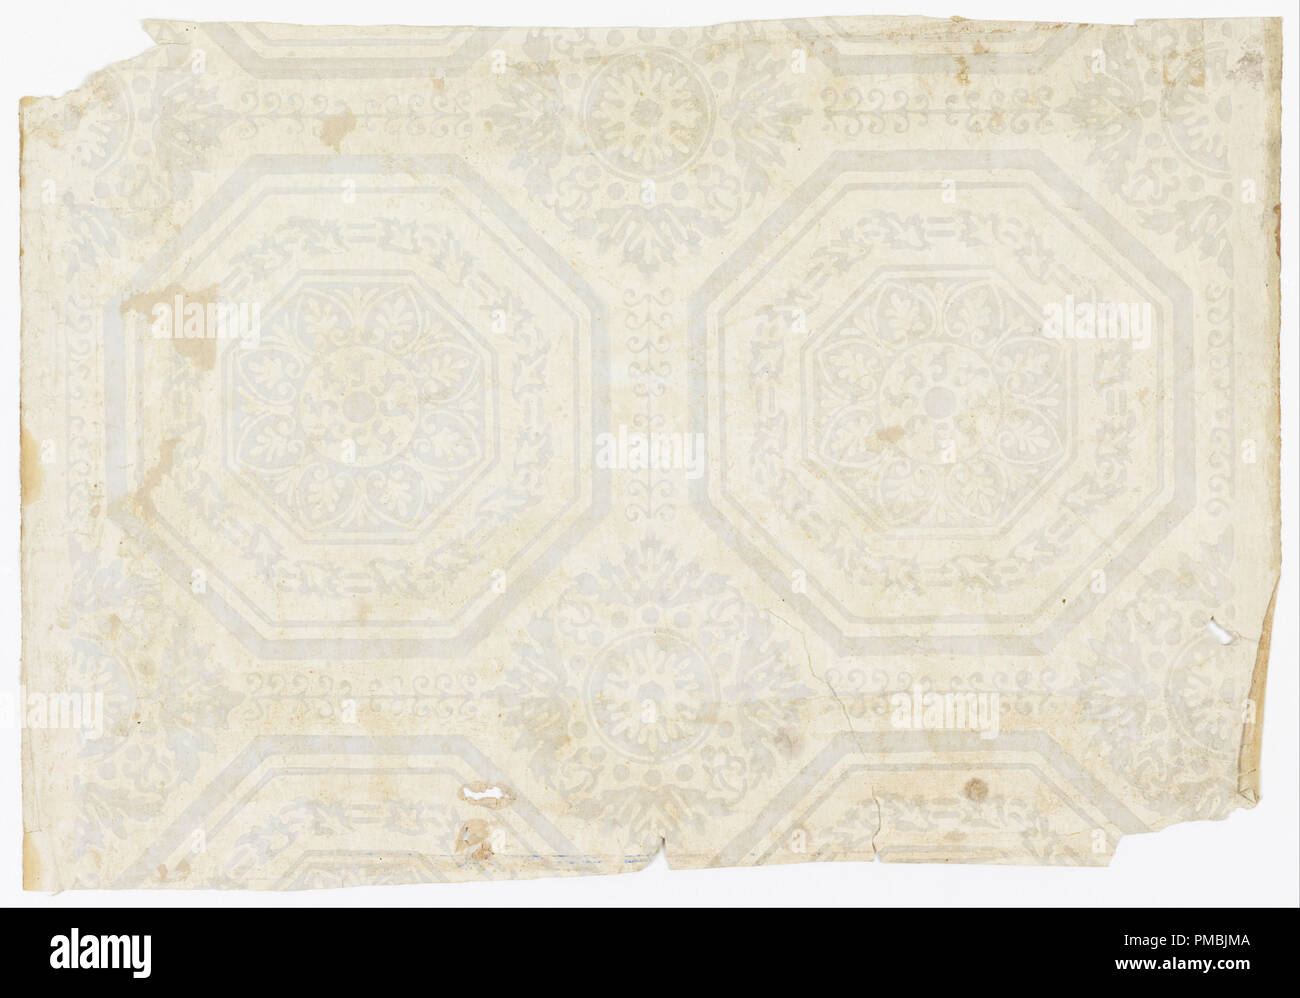 Sidewall. Date/Period: 1800-50. Sidewall. Block-printed on handmade or machine-made paper. Author: UNKNOWN. Stock Photo